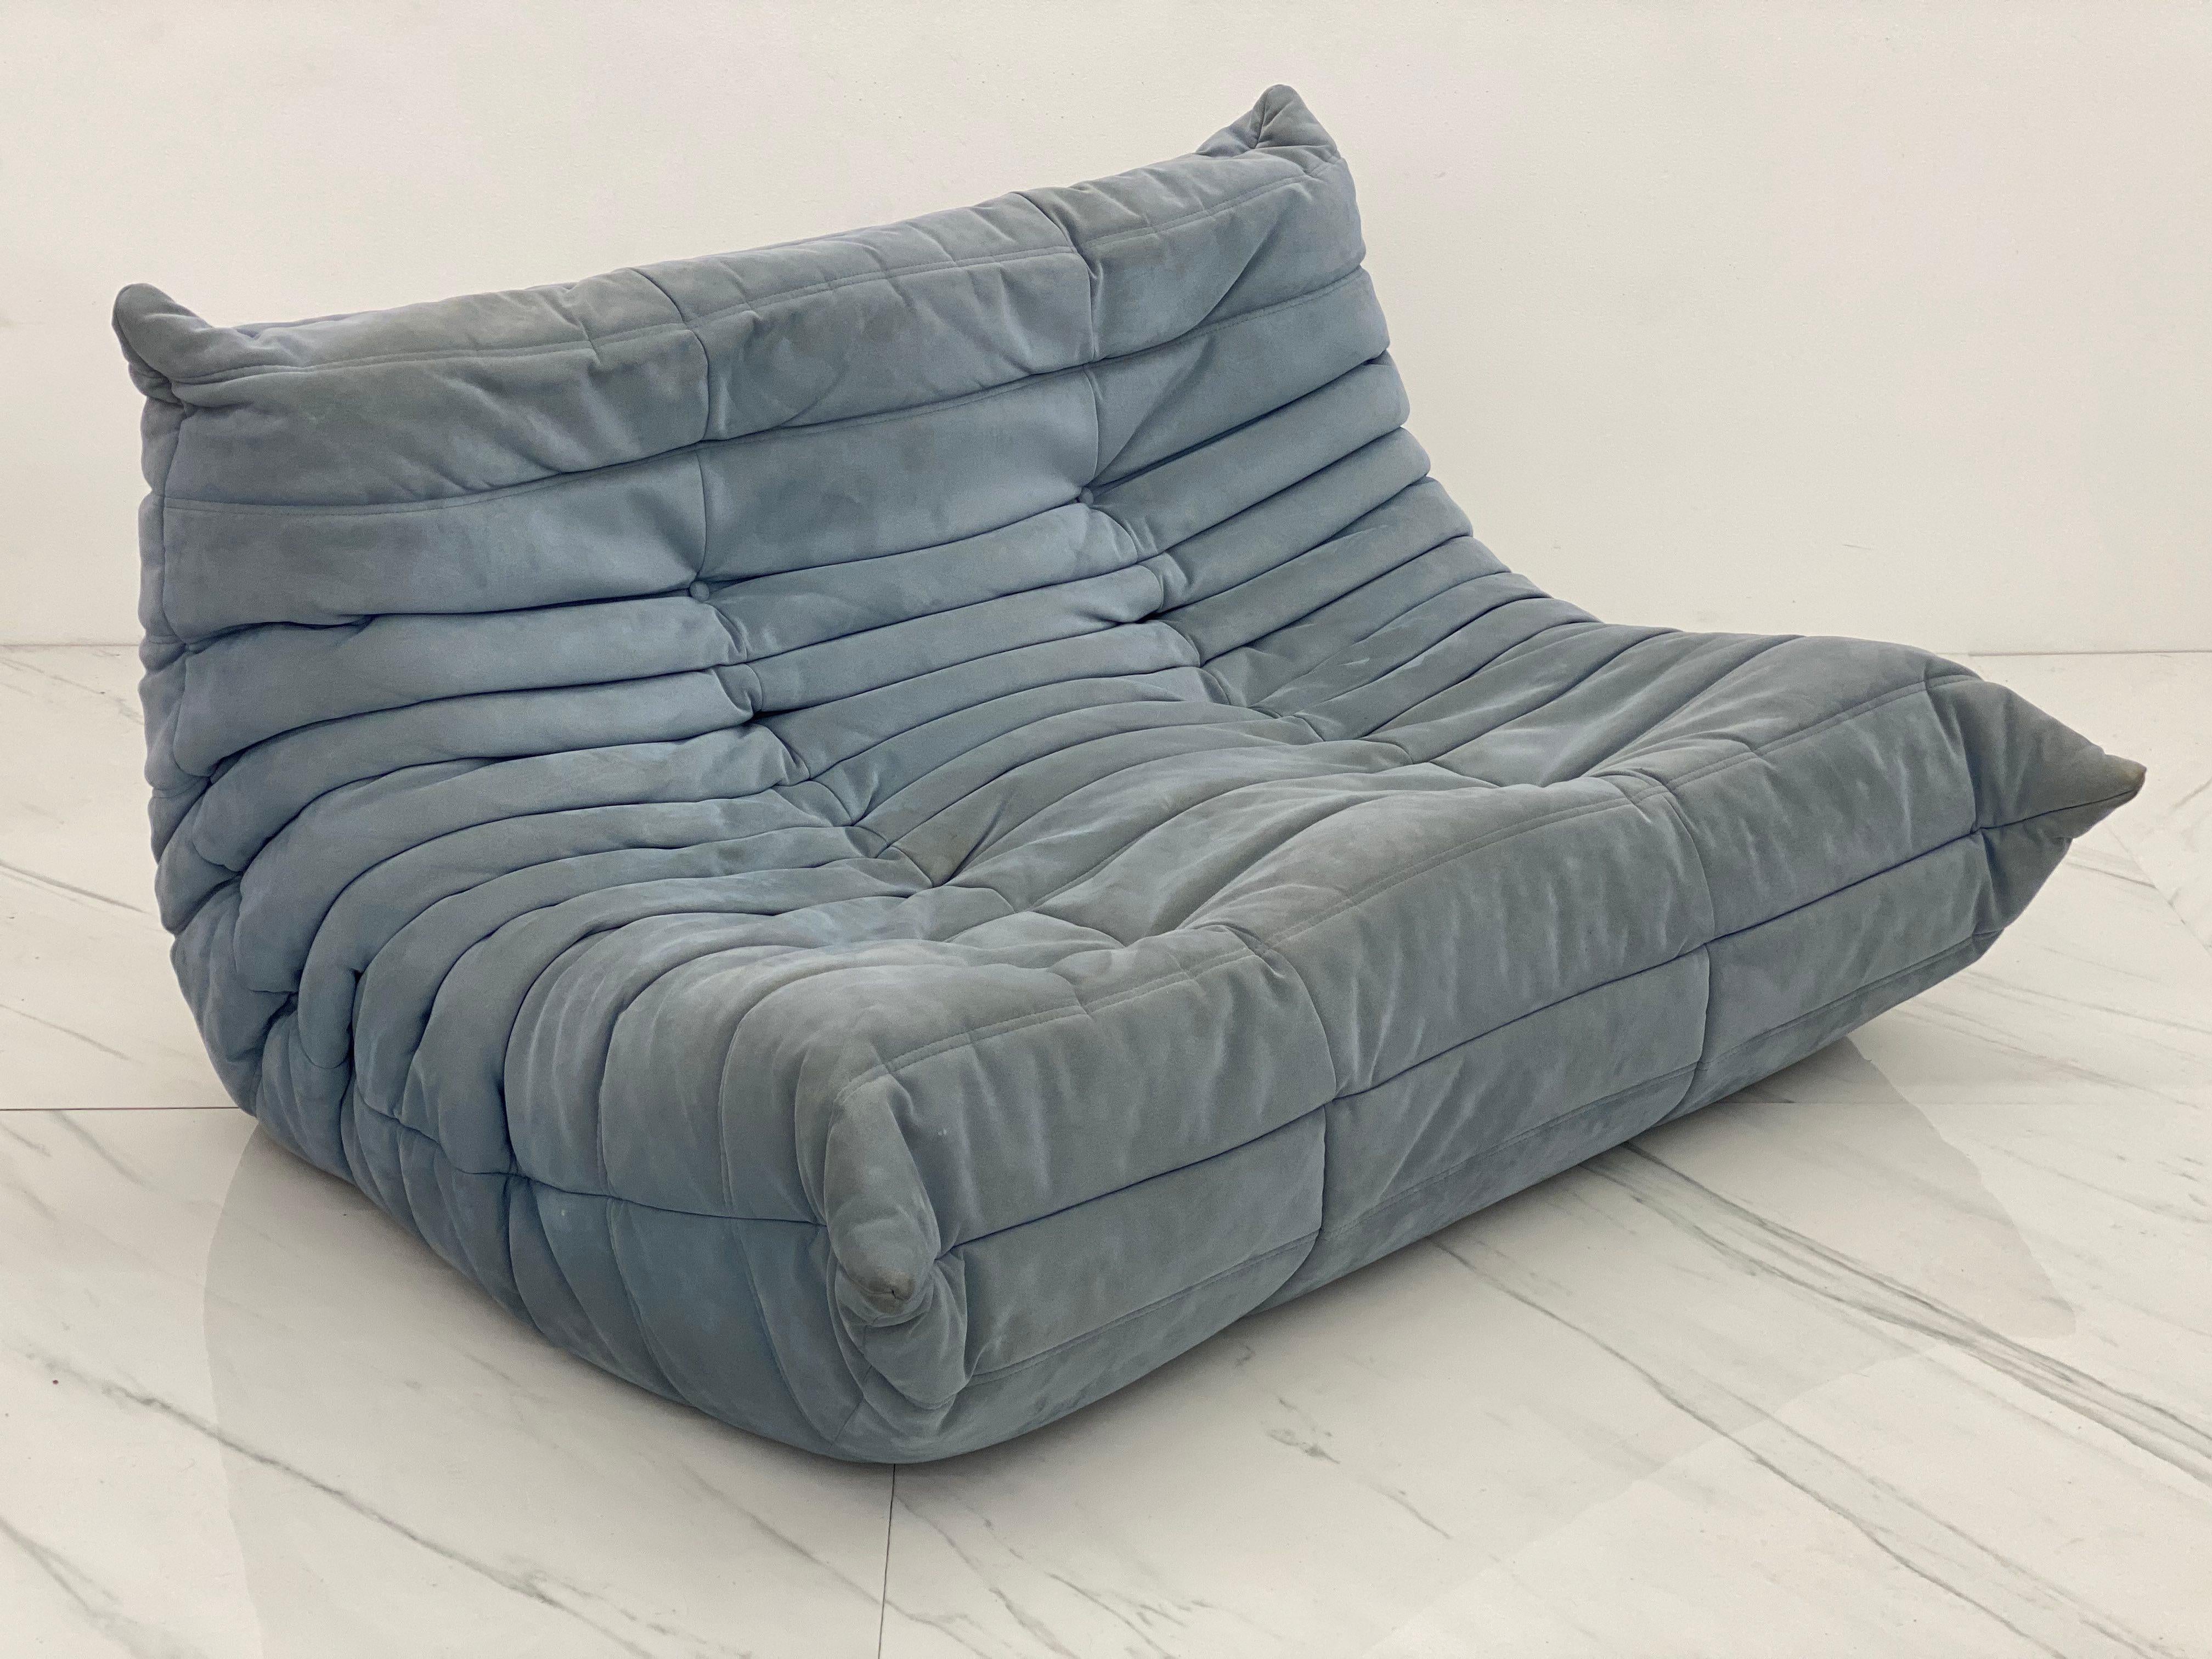 Late 20th Century Baby Blue 'Togo' Sectional Sofa by Michel Ducaroy for Ligne Roset, Signed